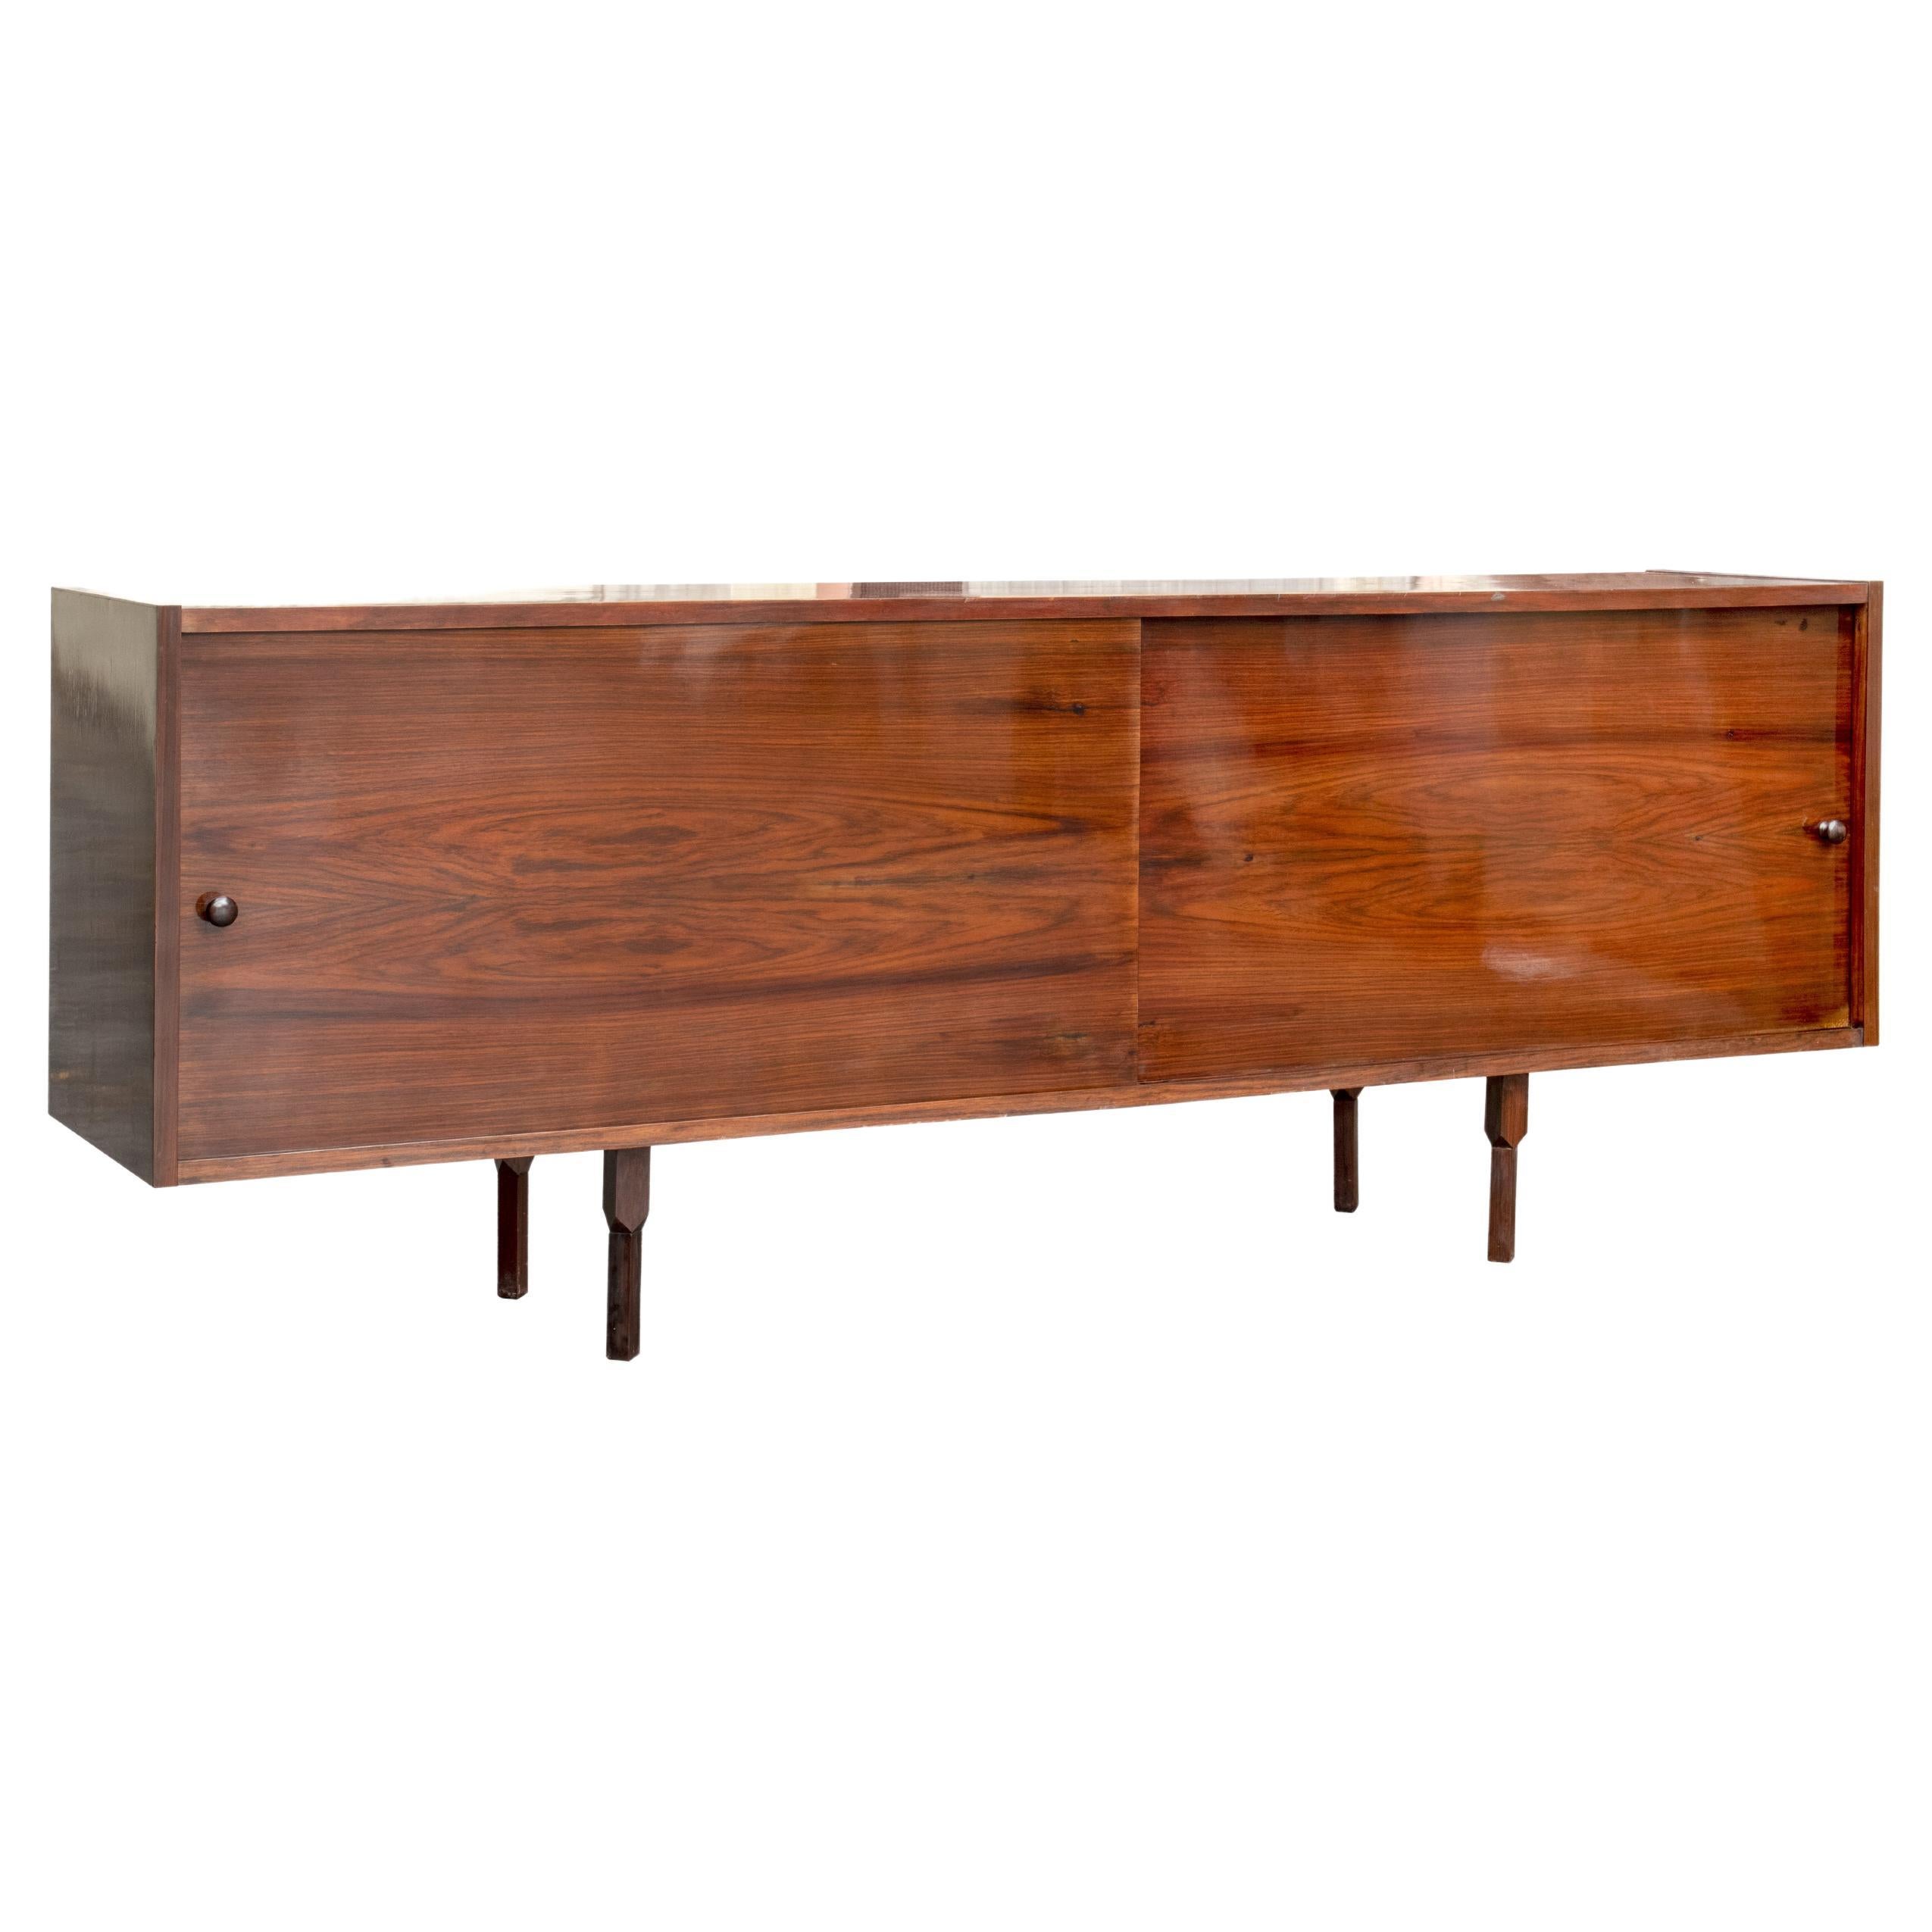 Vintage Wooden Sideboard, Italian Production, Mid-20th Century For Sale